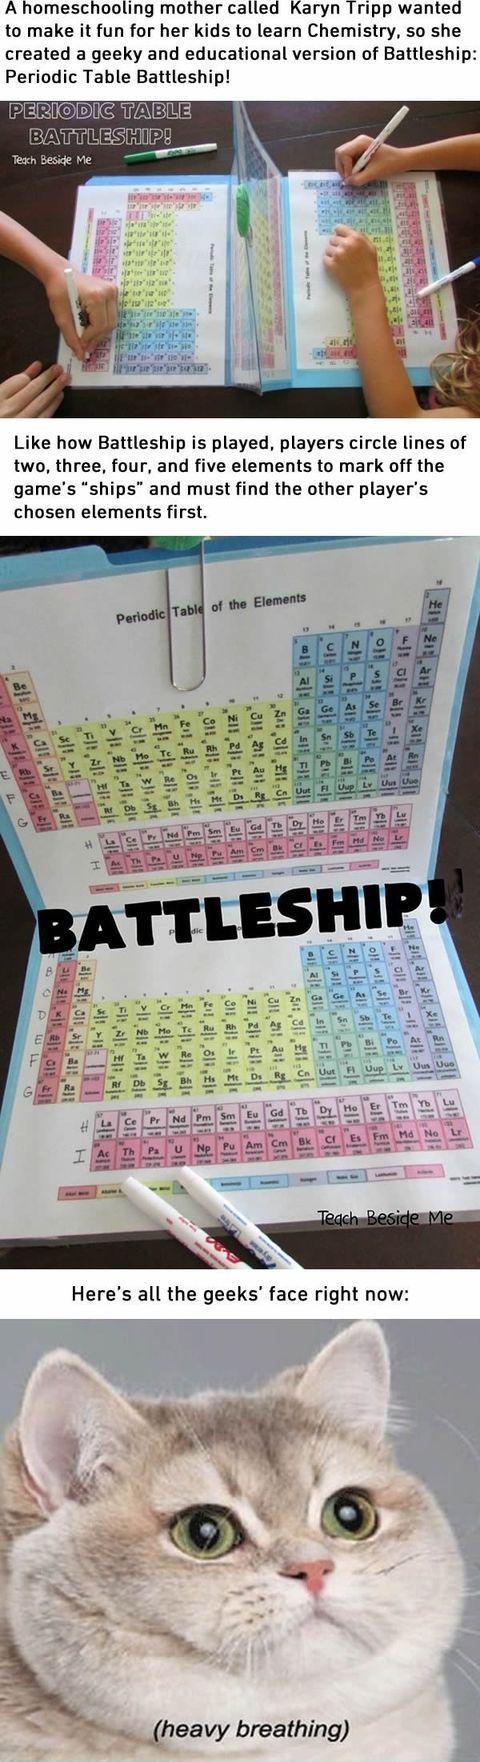 How to love Chemistry more with this Periodic Table Battleship